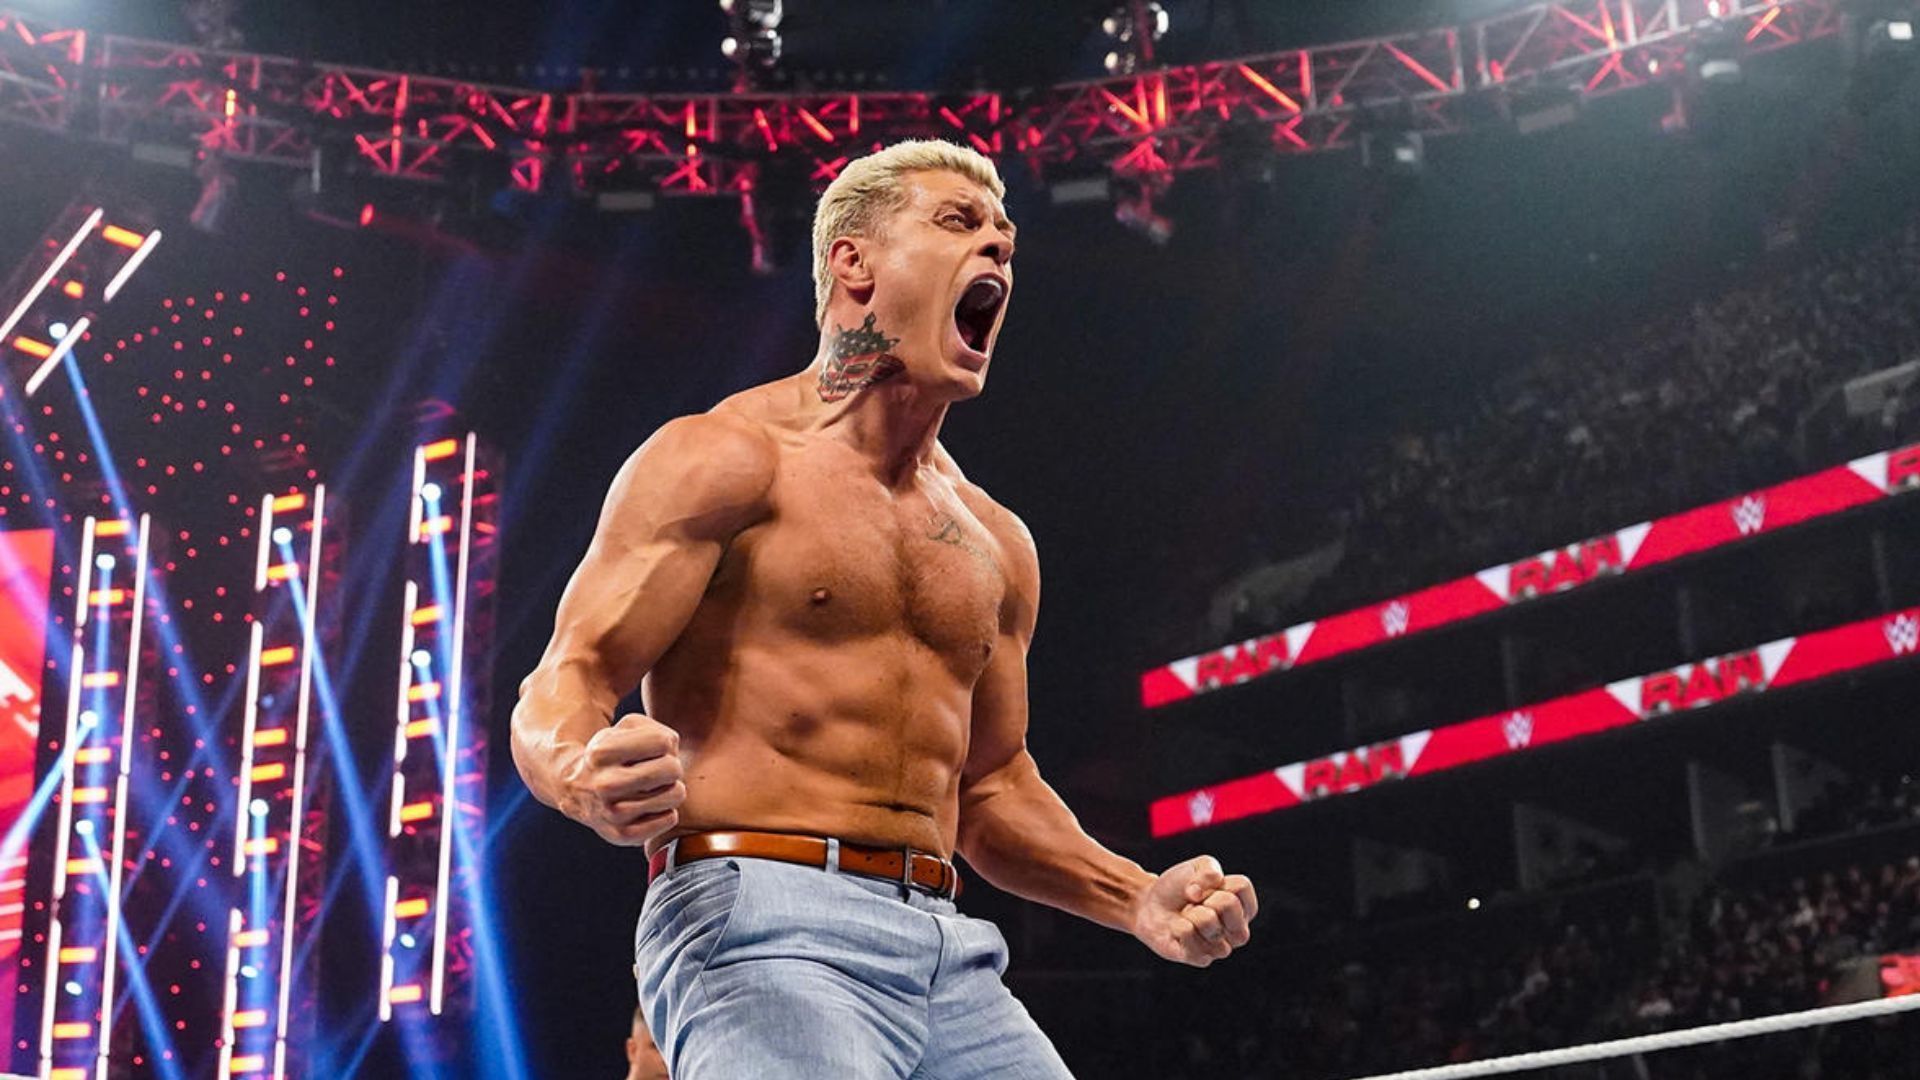 Cody Rhodes is on his way to WrestleMania